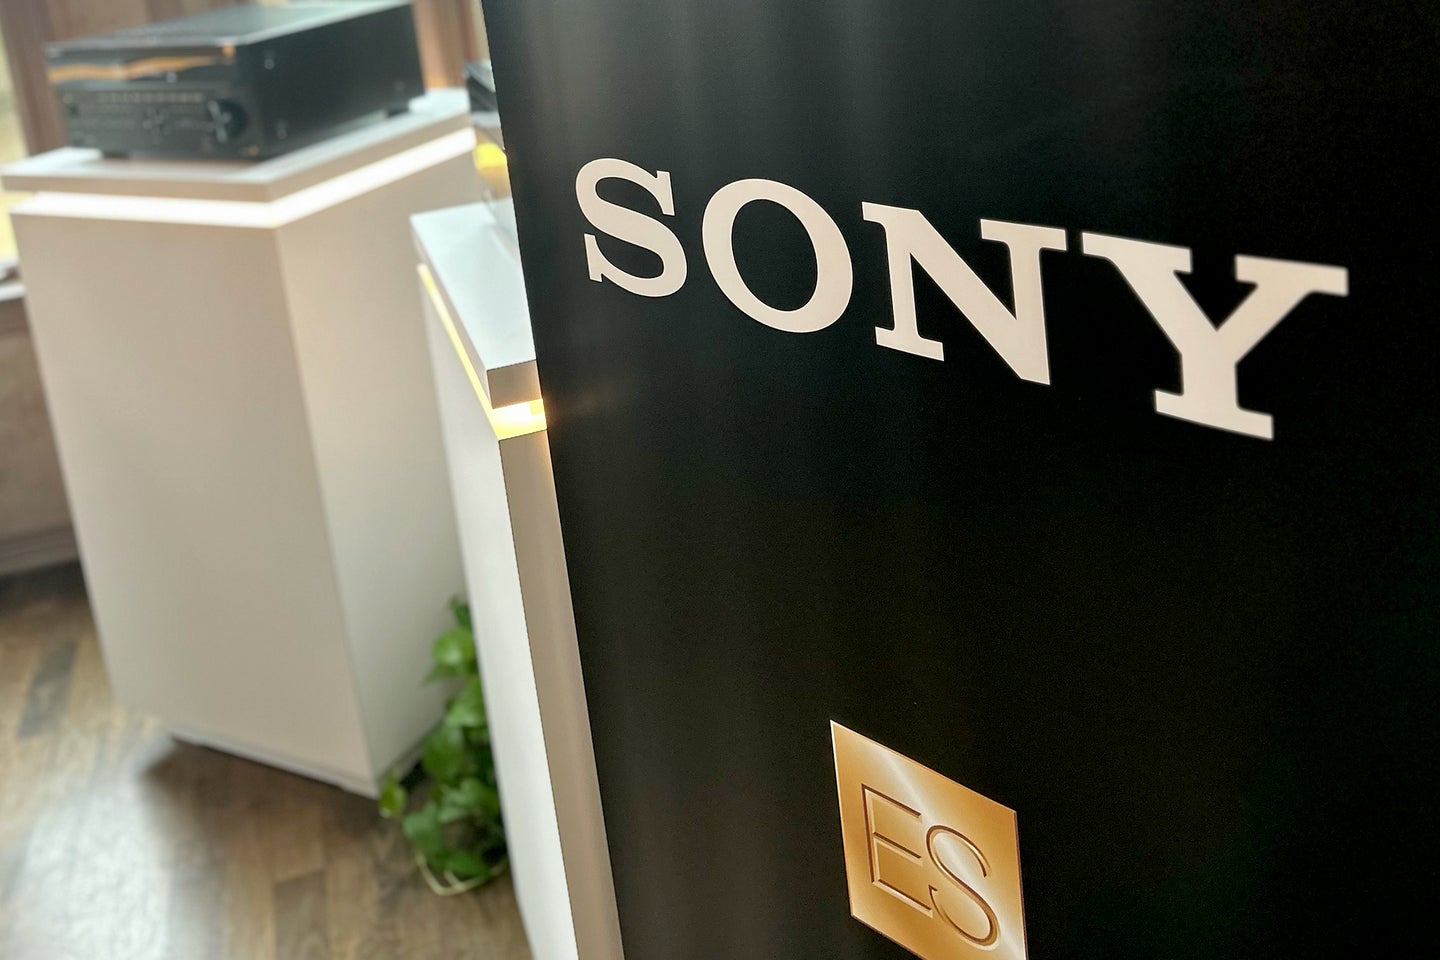 Sony ES banner with AVR in the background